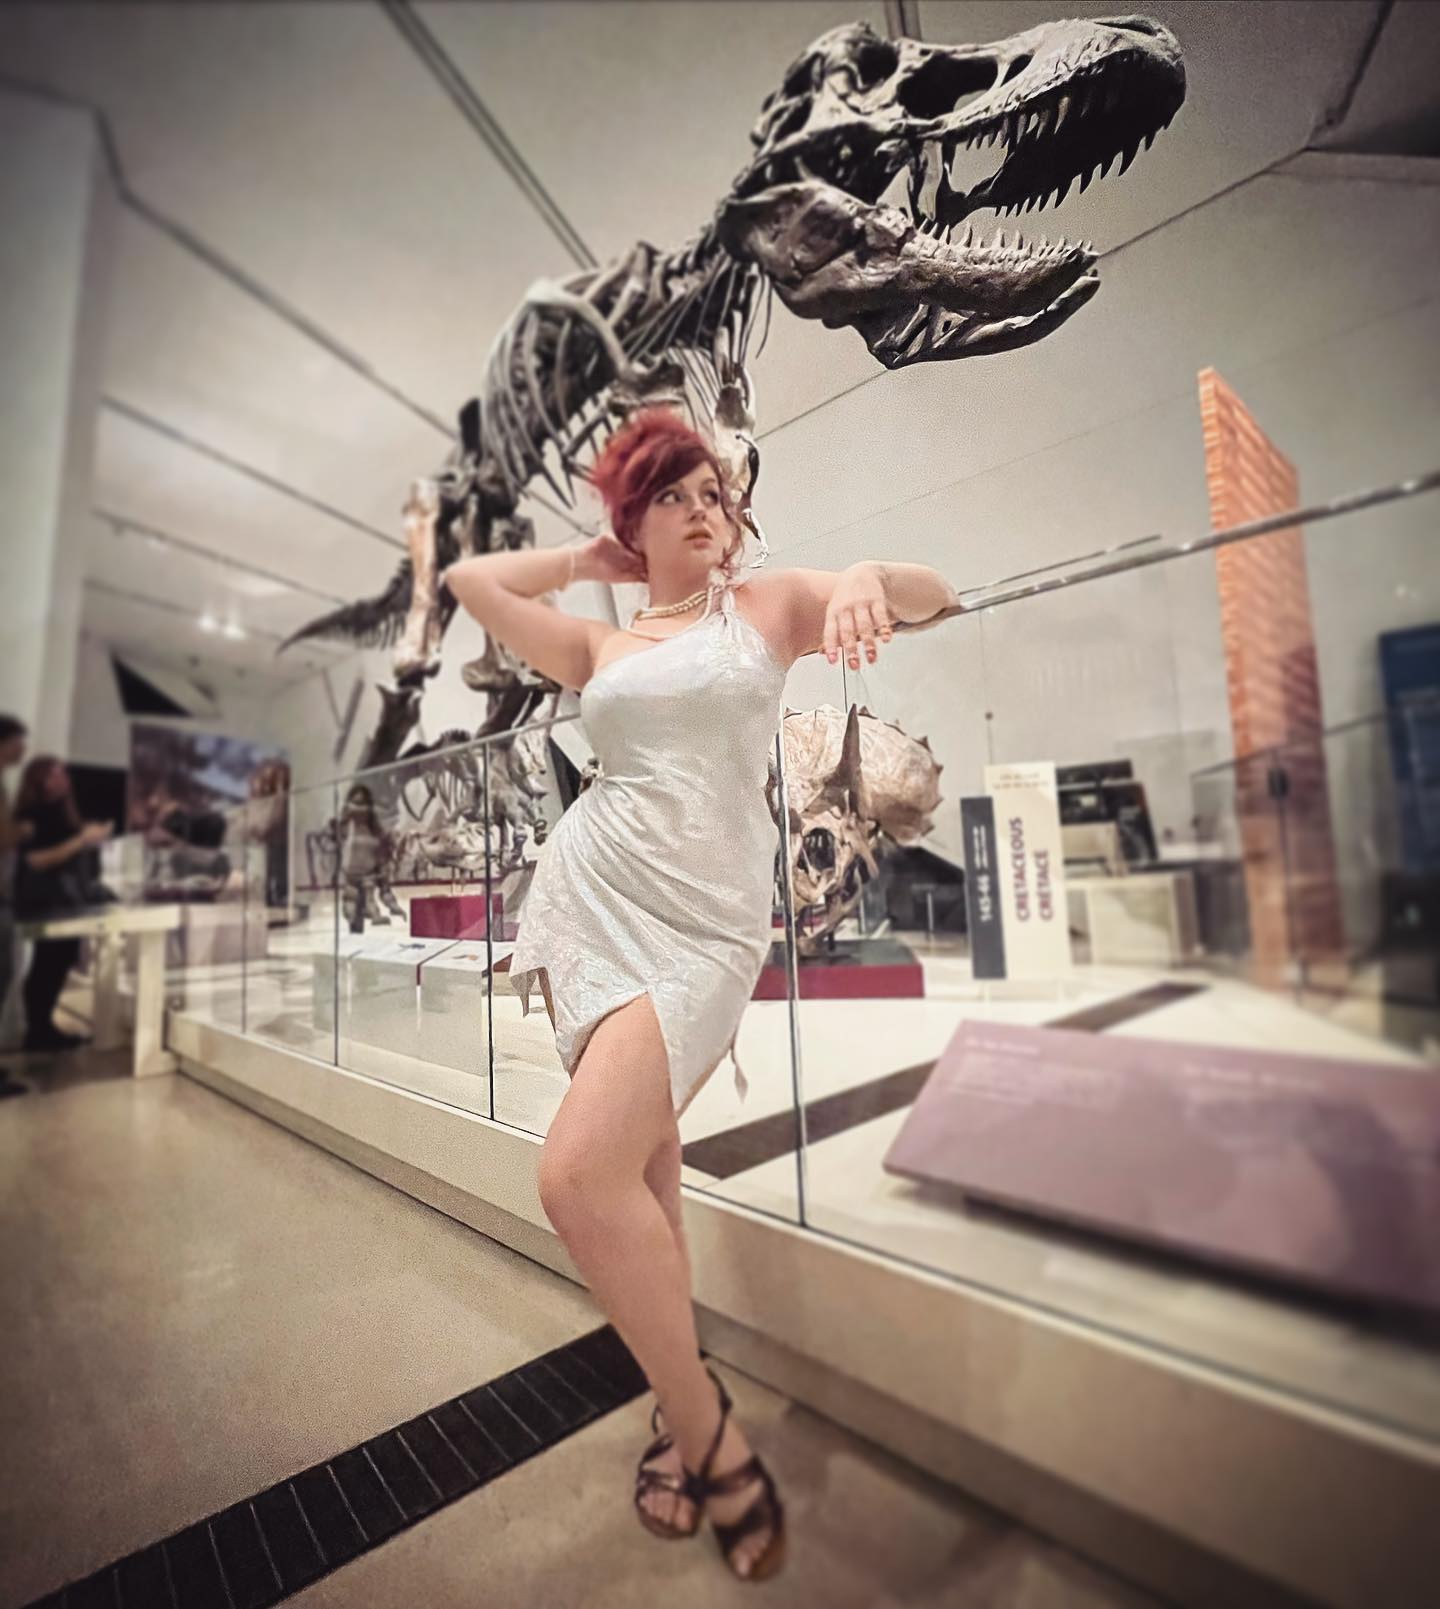 One of my more rarely seen old burlesque acts as Wilma Flintstone was the PERFECT costume for ROM After Dark for Halloween. 🦖 I saw a few Freds and Jurassic Park people too (and some guys who didn’t bother dressing up. Boring.)
Going to post some of these and then a few of the nun and other costumes from this year 😊 
—-
#redhead #WilmaFlintstone #Redherring #RedheadsDoItBetter #hourglassfigure⌛️ #WilmaFlintstoneCostume #TheROM #ROMAfterDark #TyrannosaurusRex #Museum #theflintstones p: @himbheaux